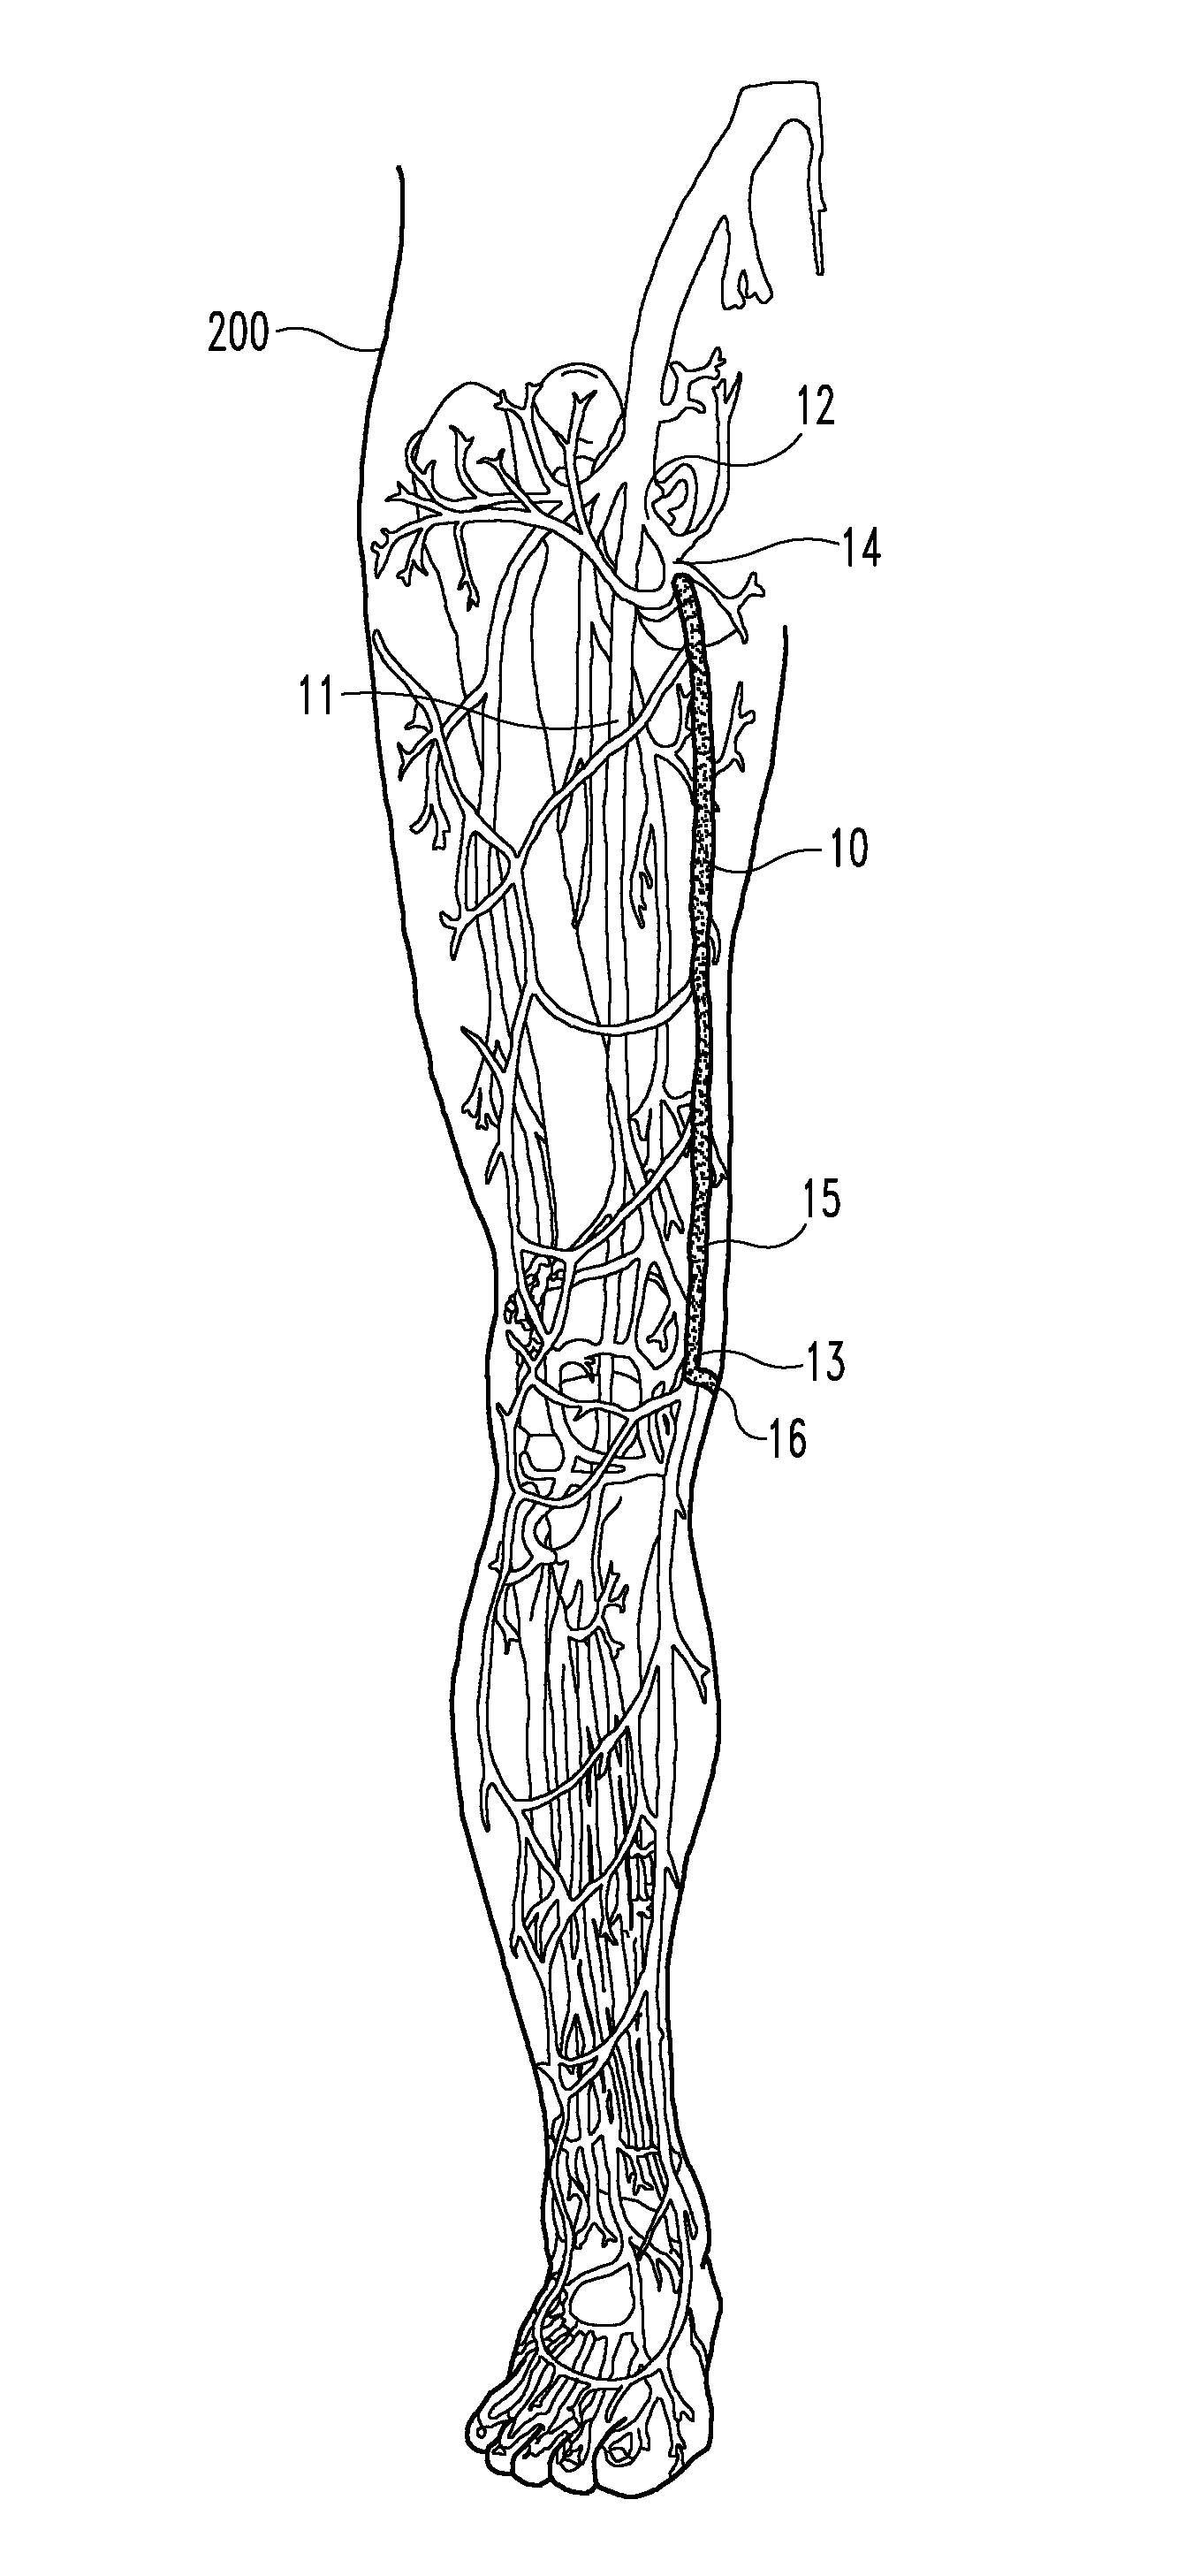 Methods for occluding bodily vessels